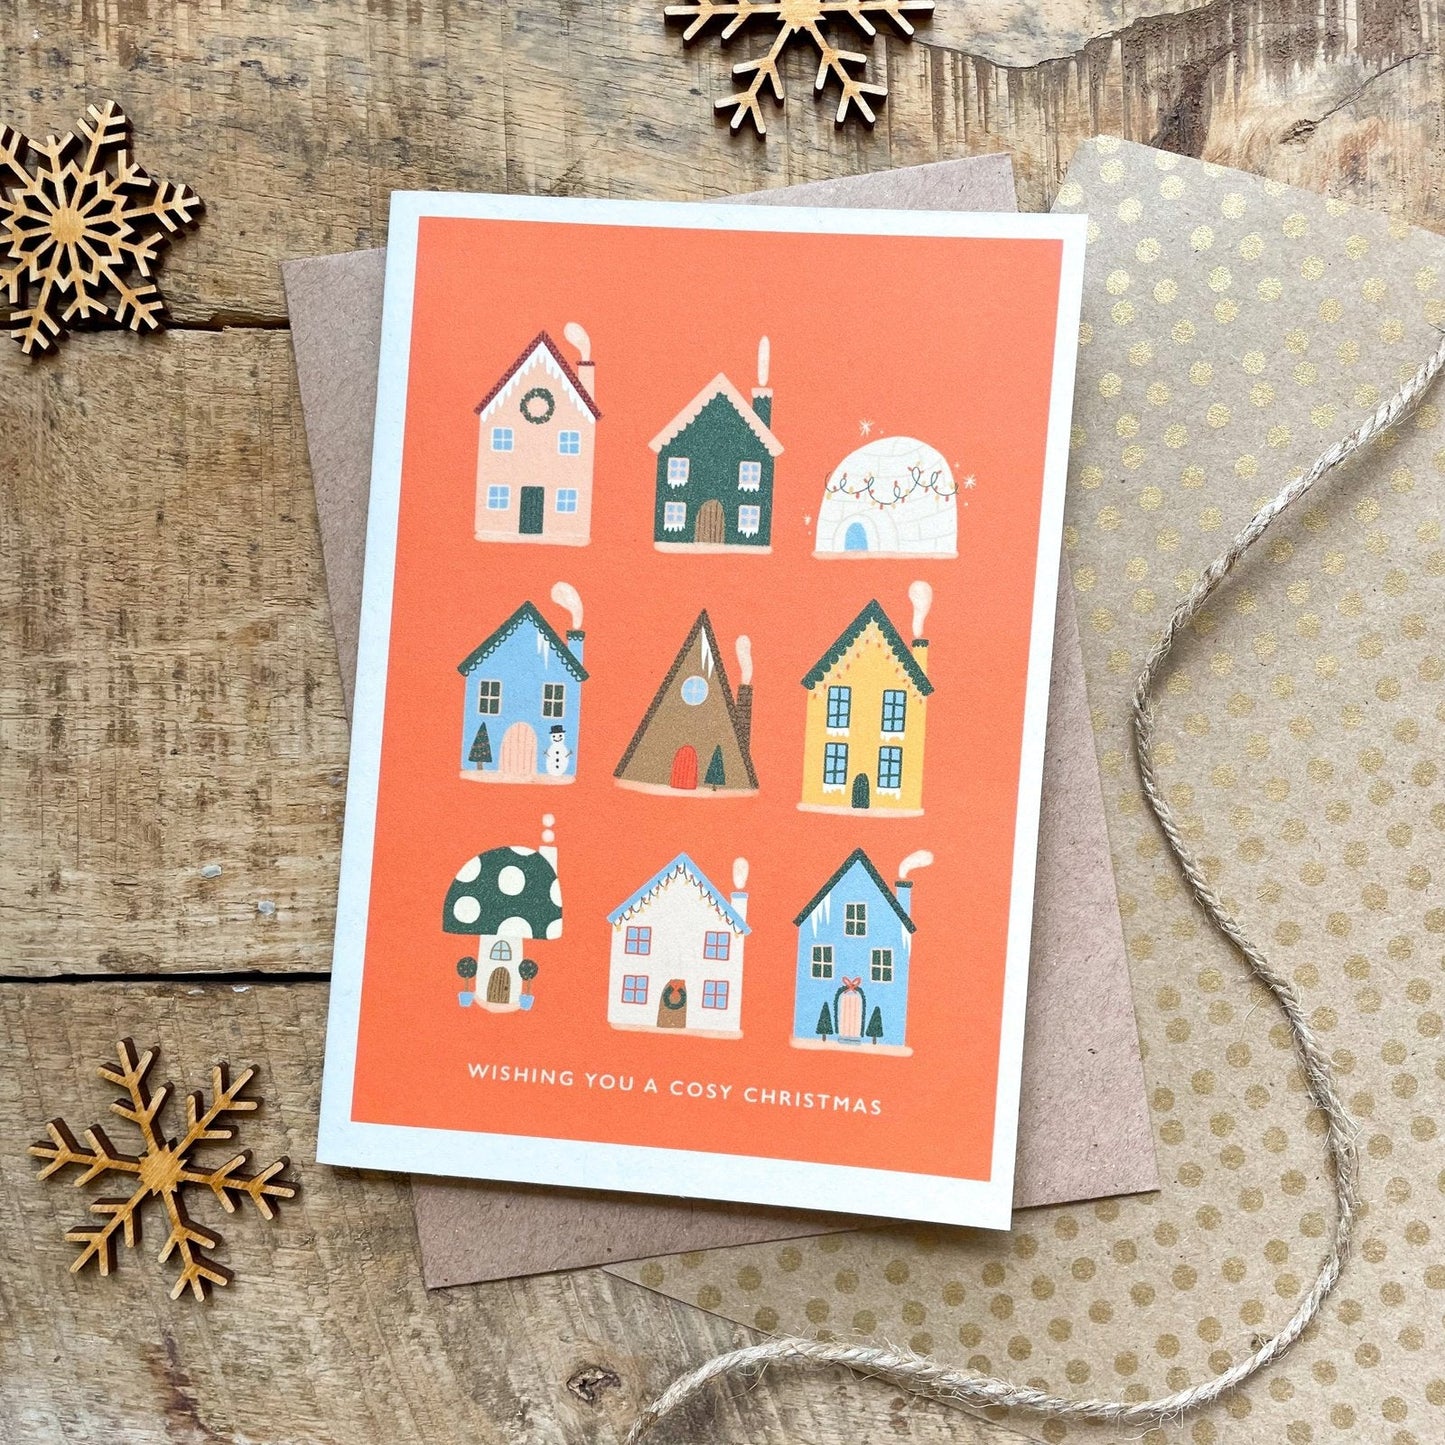 'Wishing You a Cosy Christmas' Recycled Coffee Cup Christmas Card